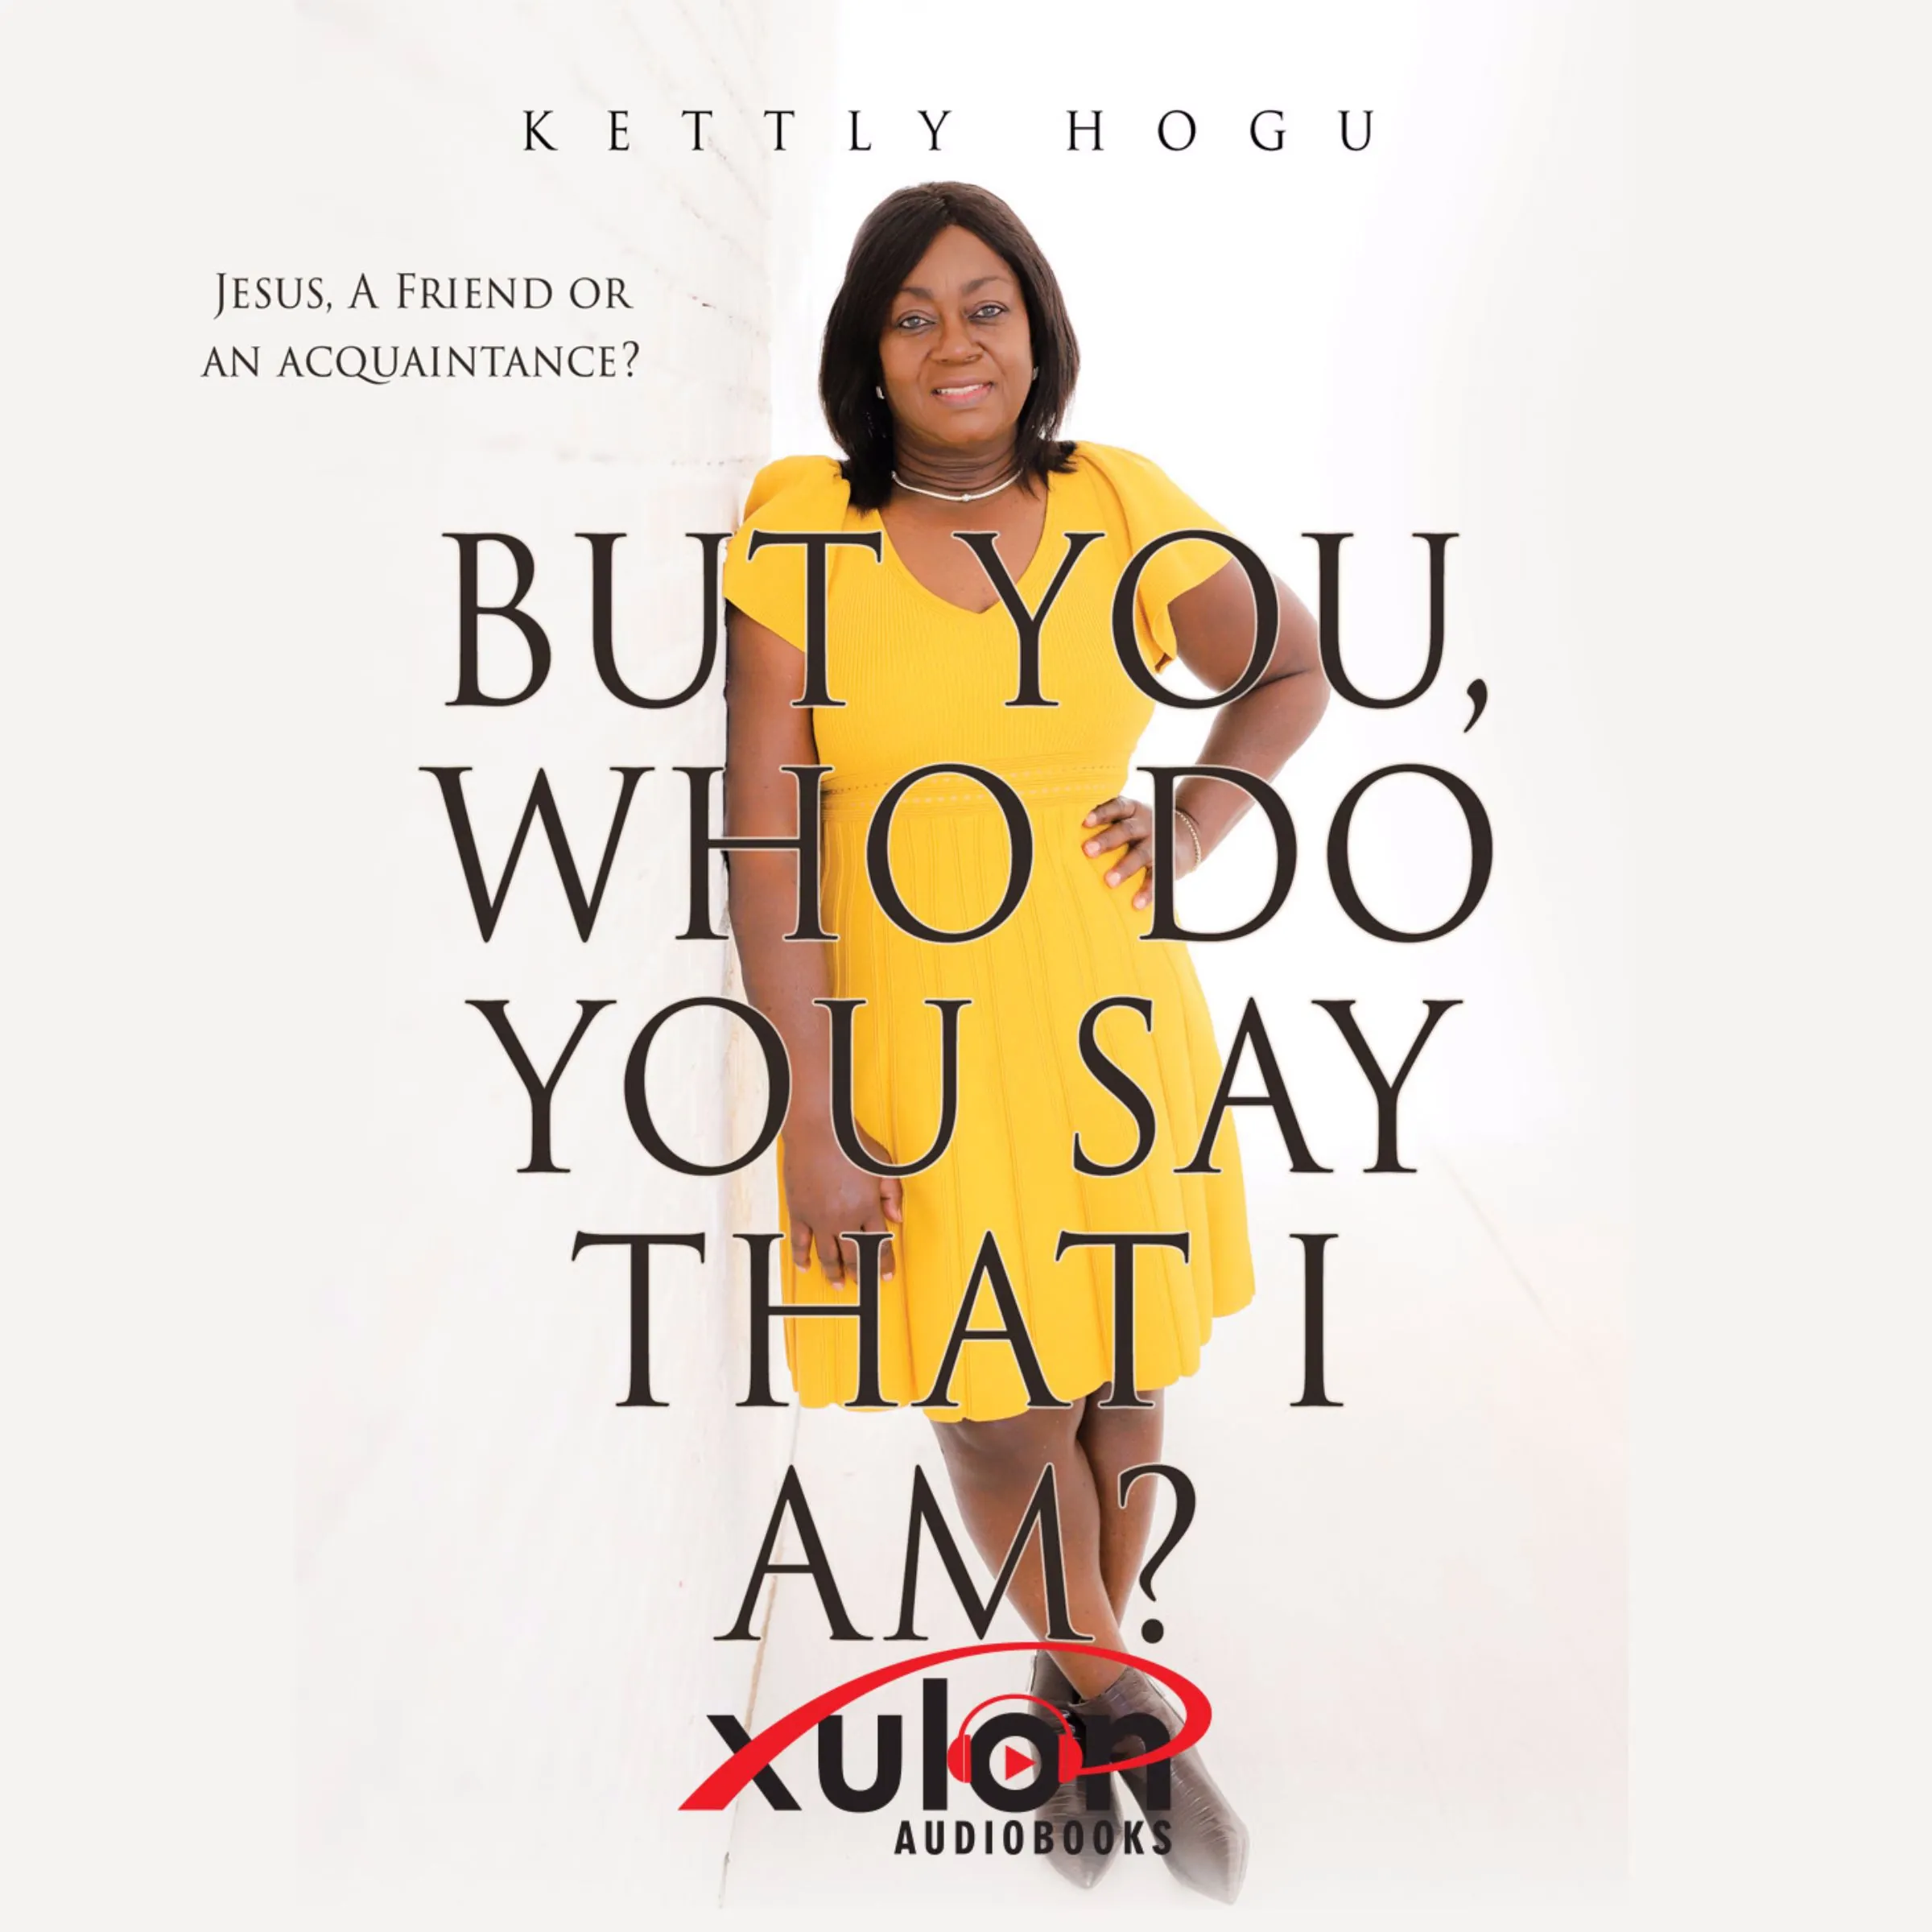 But You, Who Do You Say That I Am?: Jesus, A Friend or an Acquaintance? by Kettly Hogu Audiobook